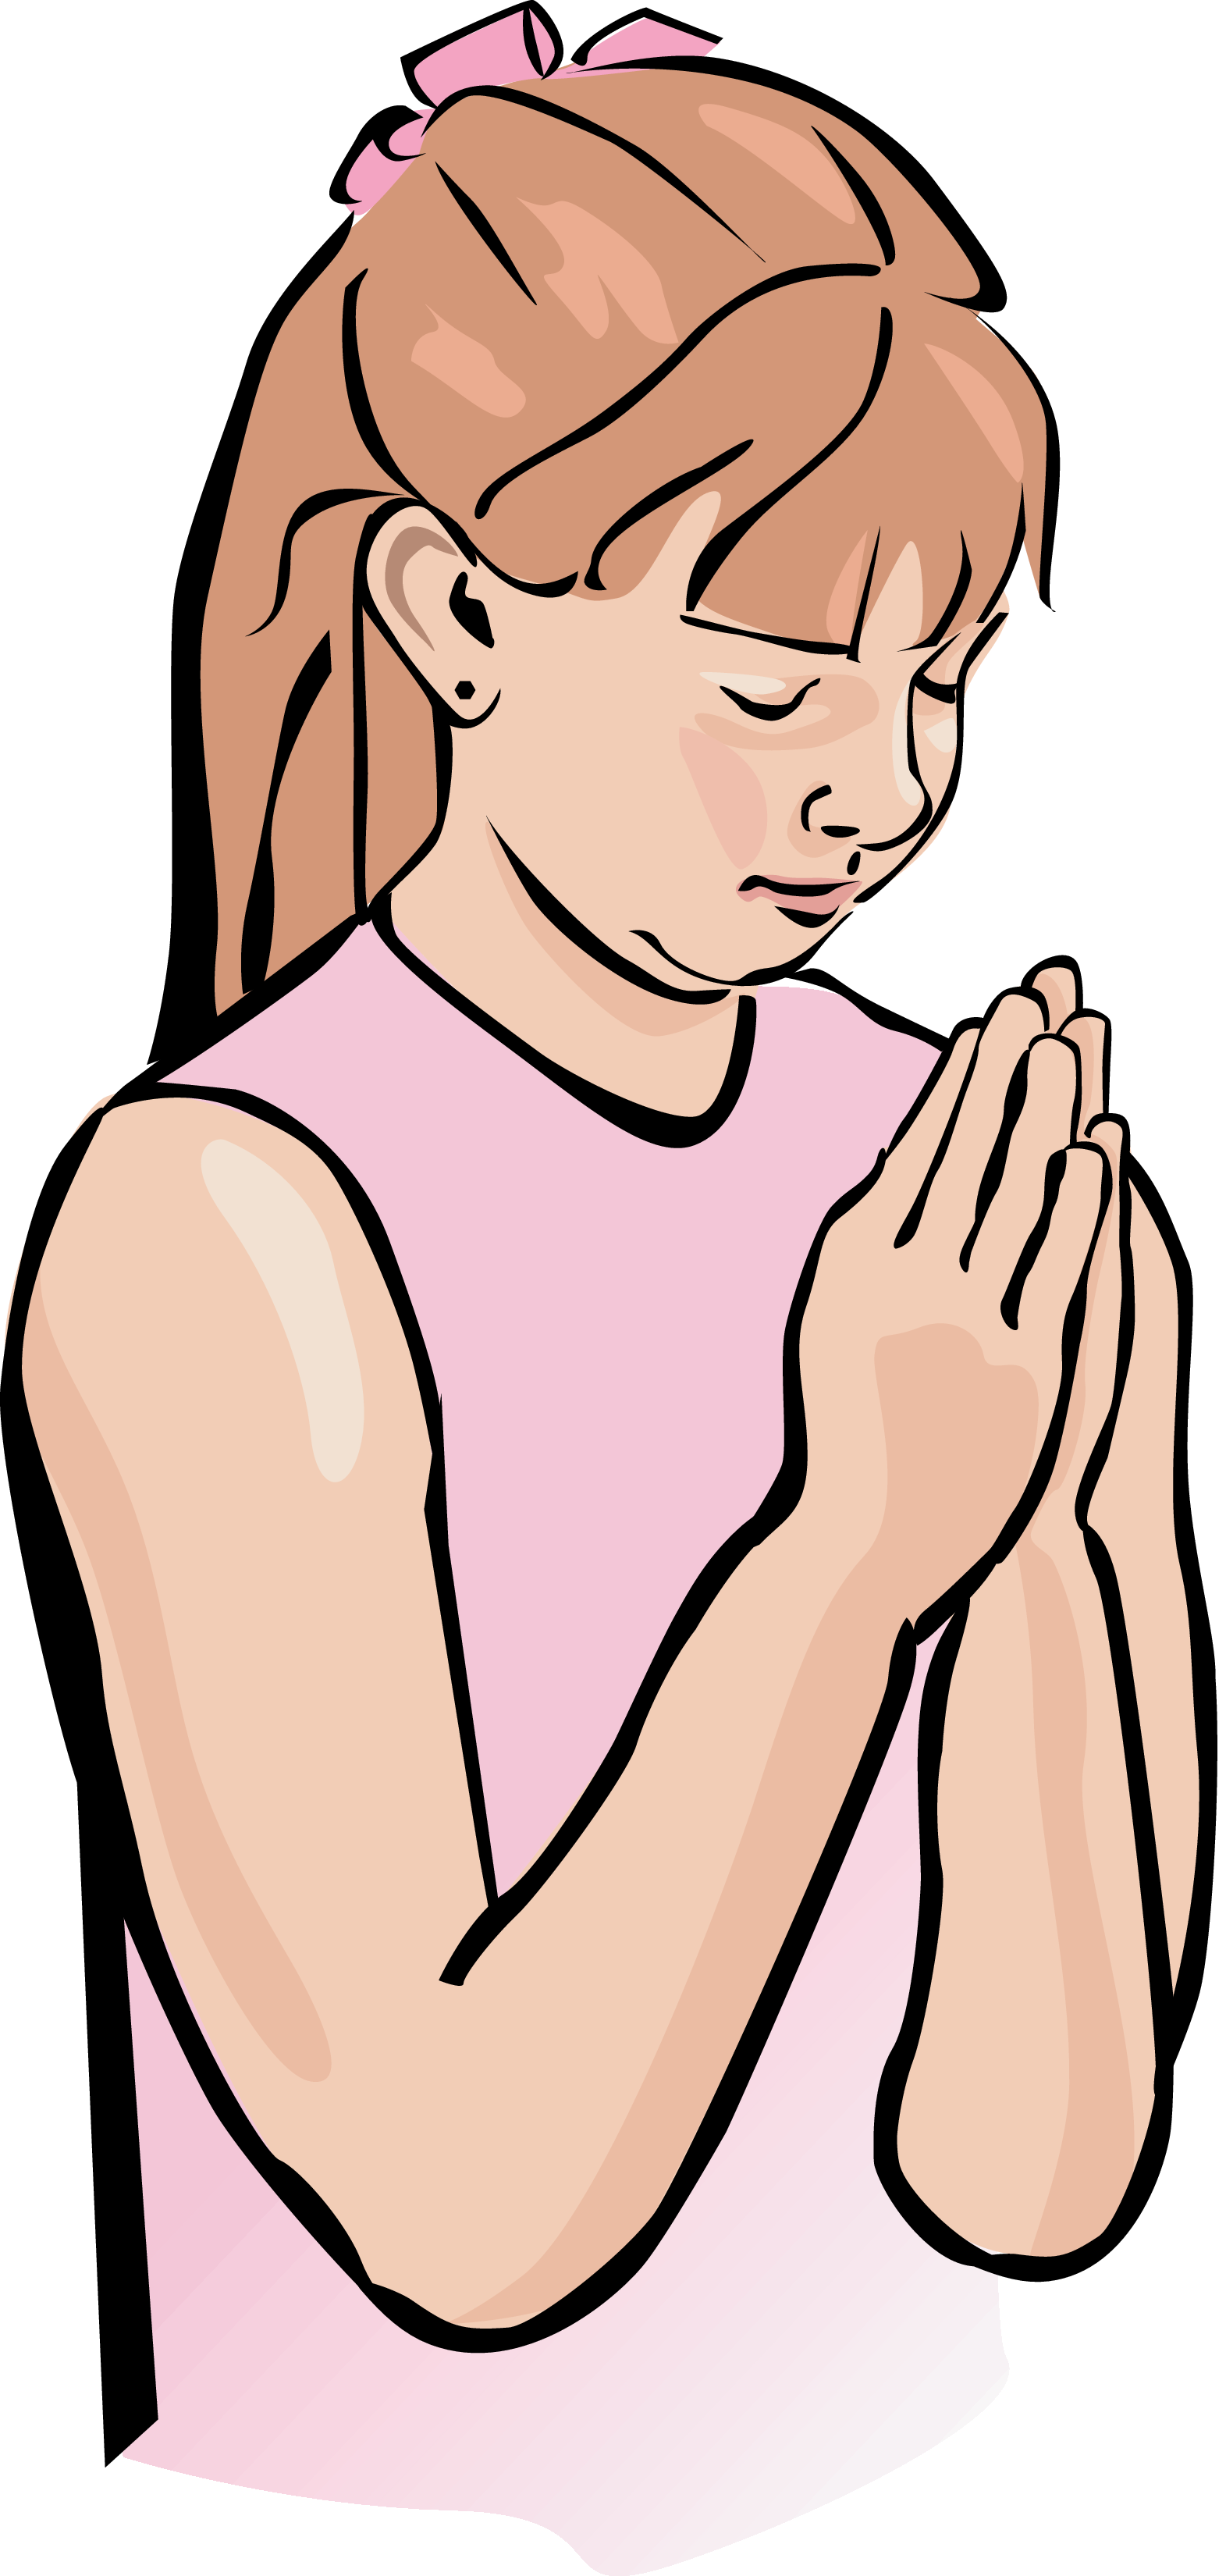 Child Prayer Images Png Image Clipart